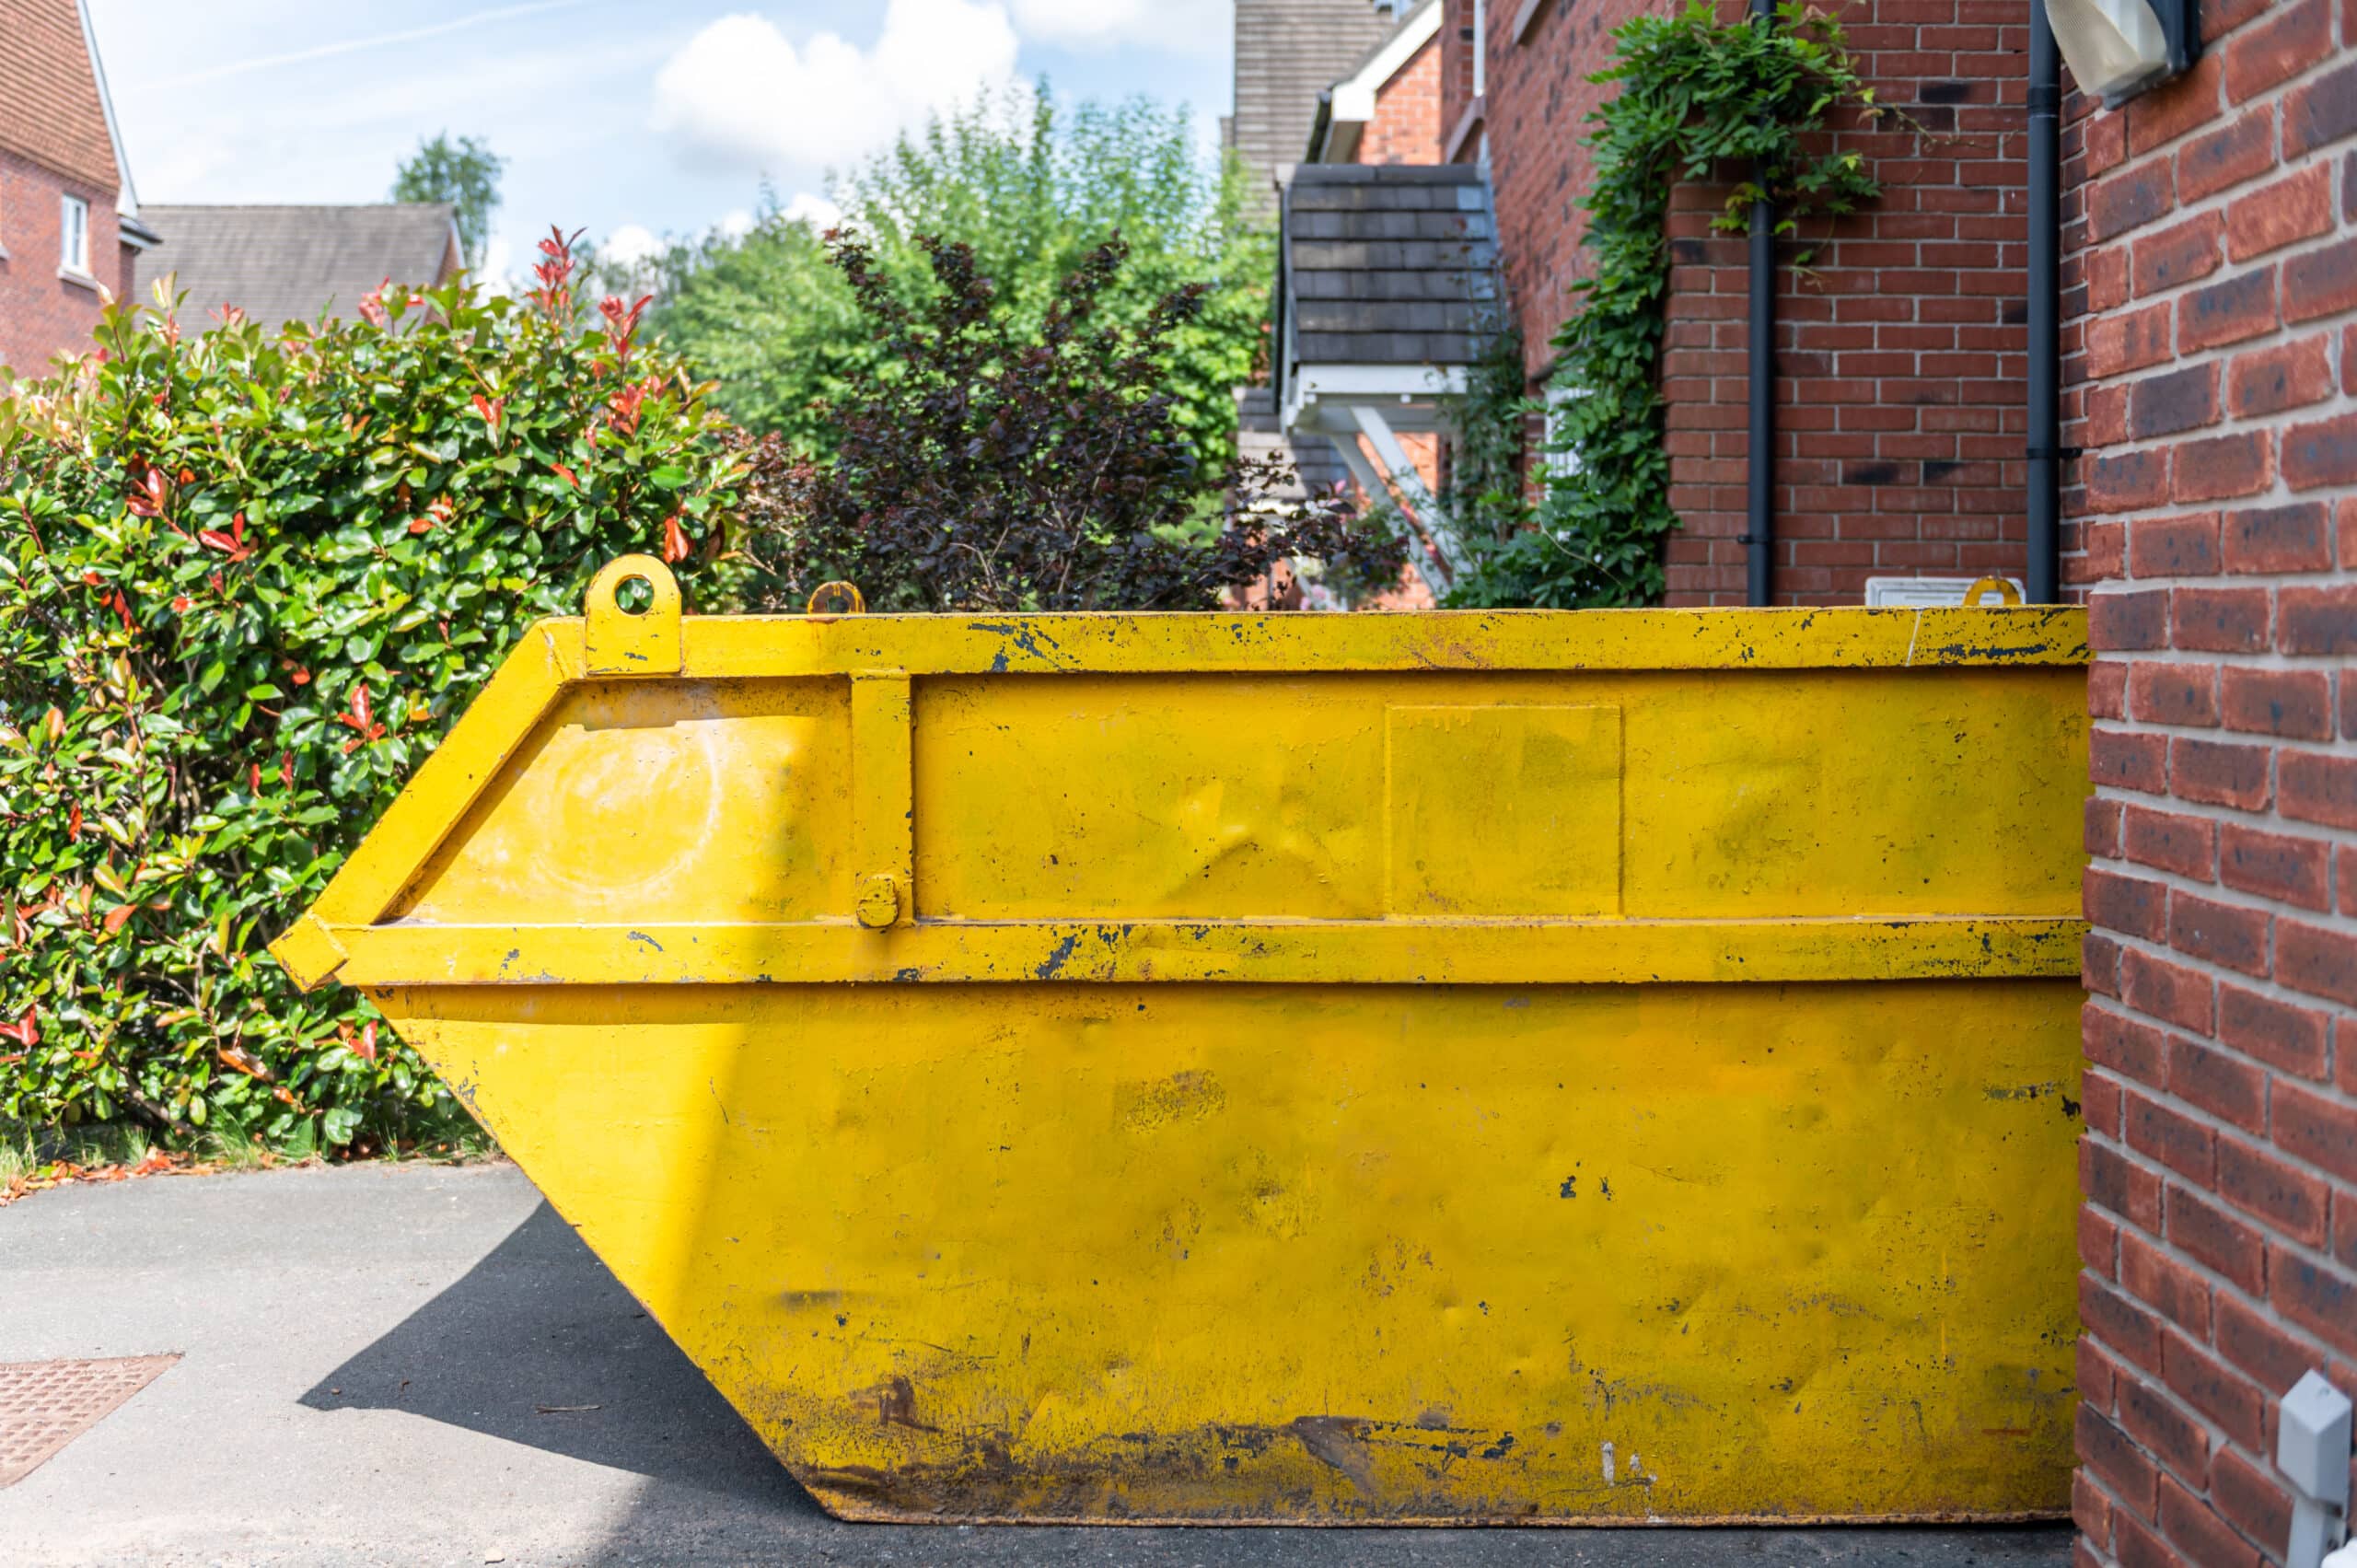 Rubbish removals services in Manchester